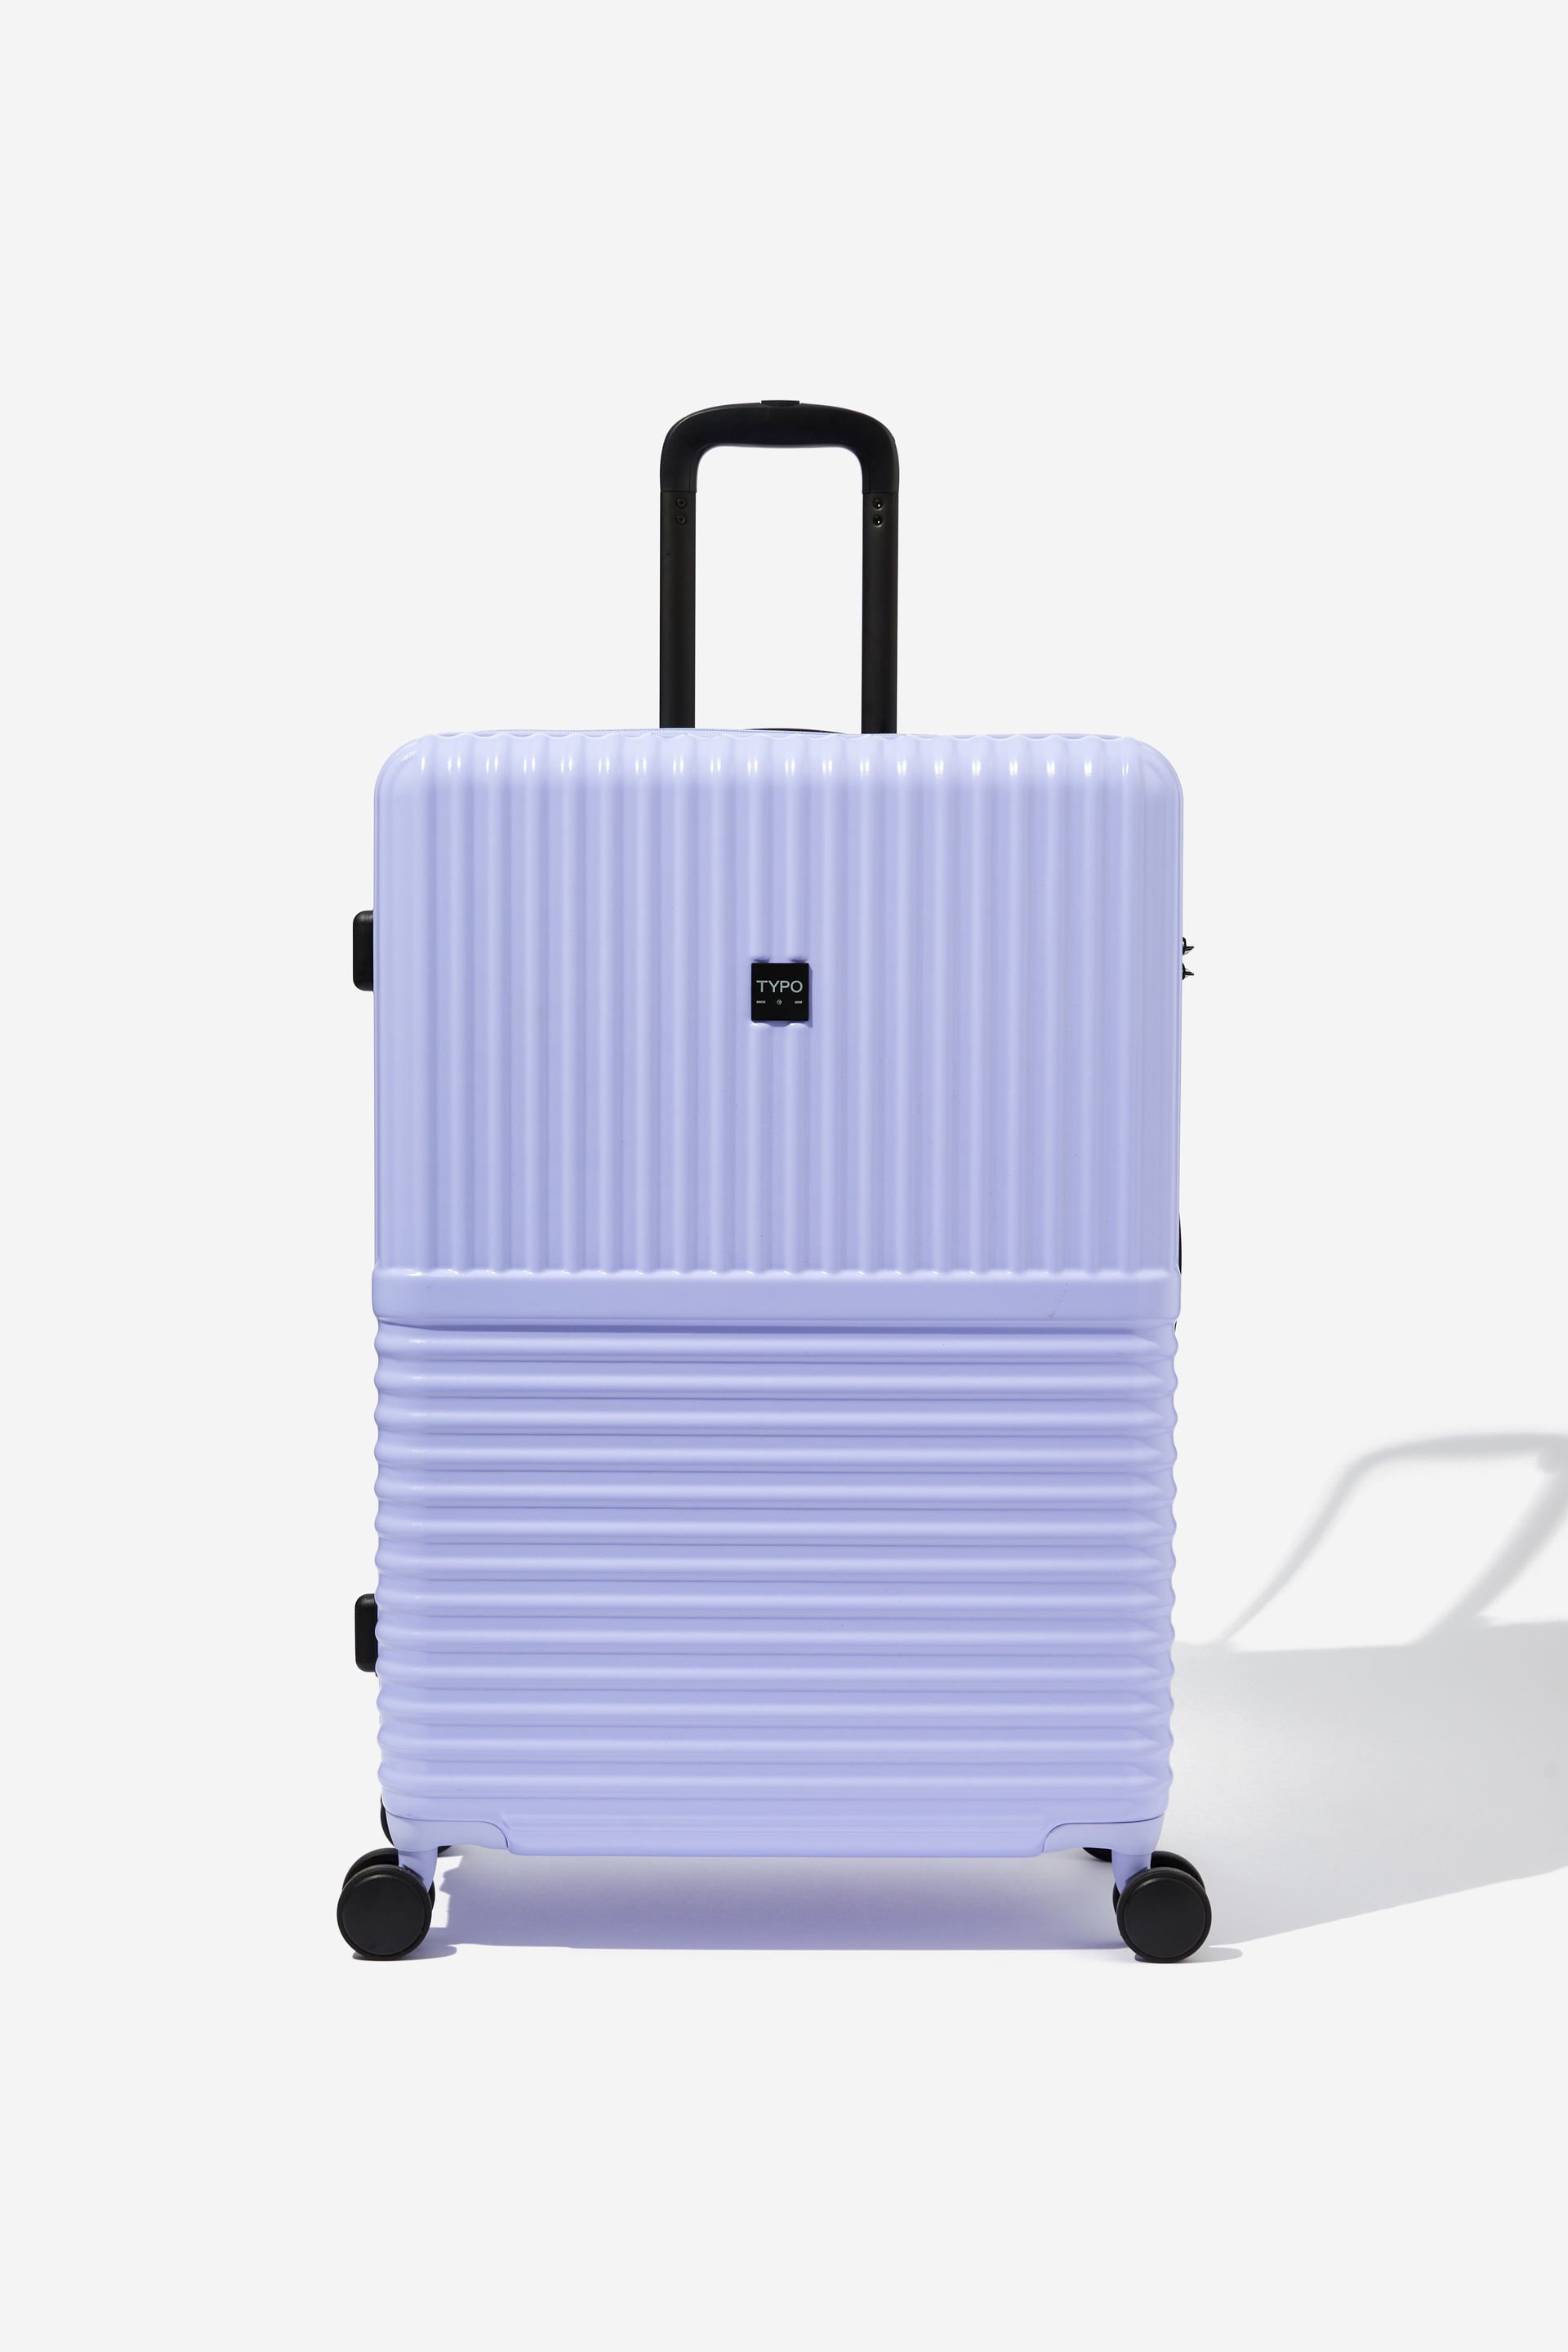 Typo - 28 Inch Large Suitcase - Soft lilac